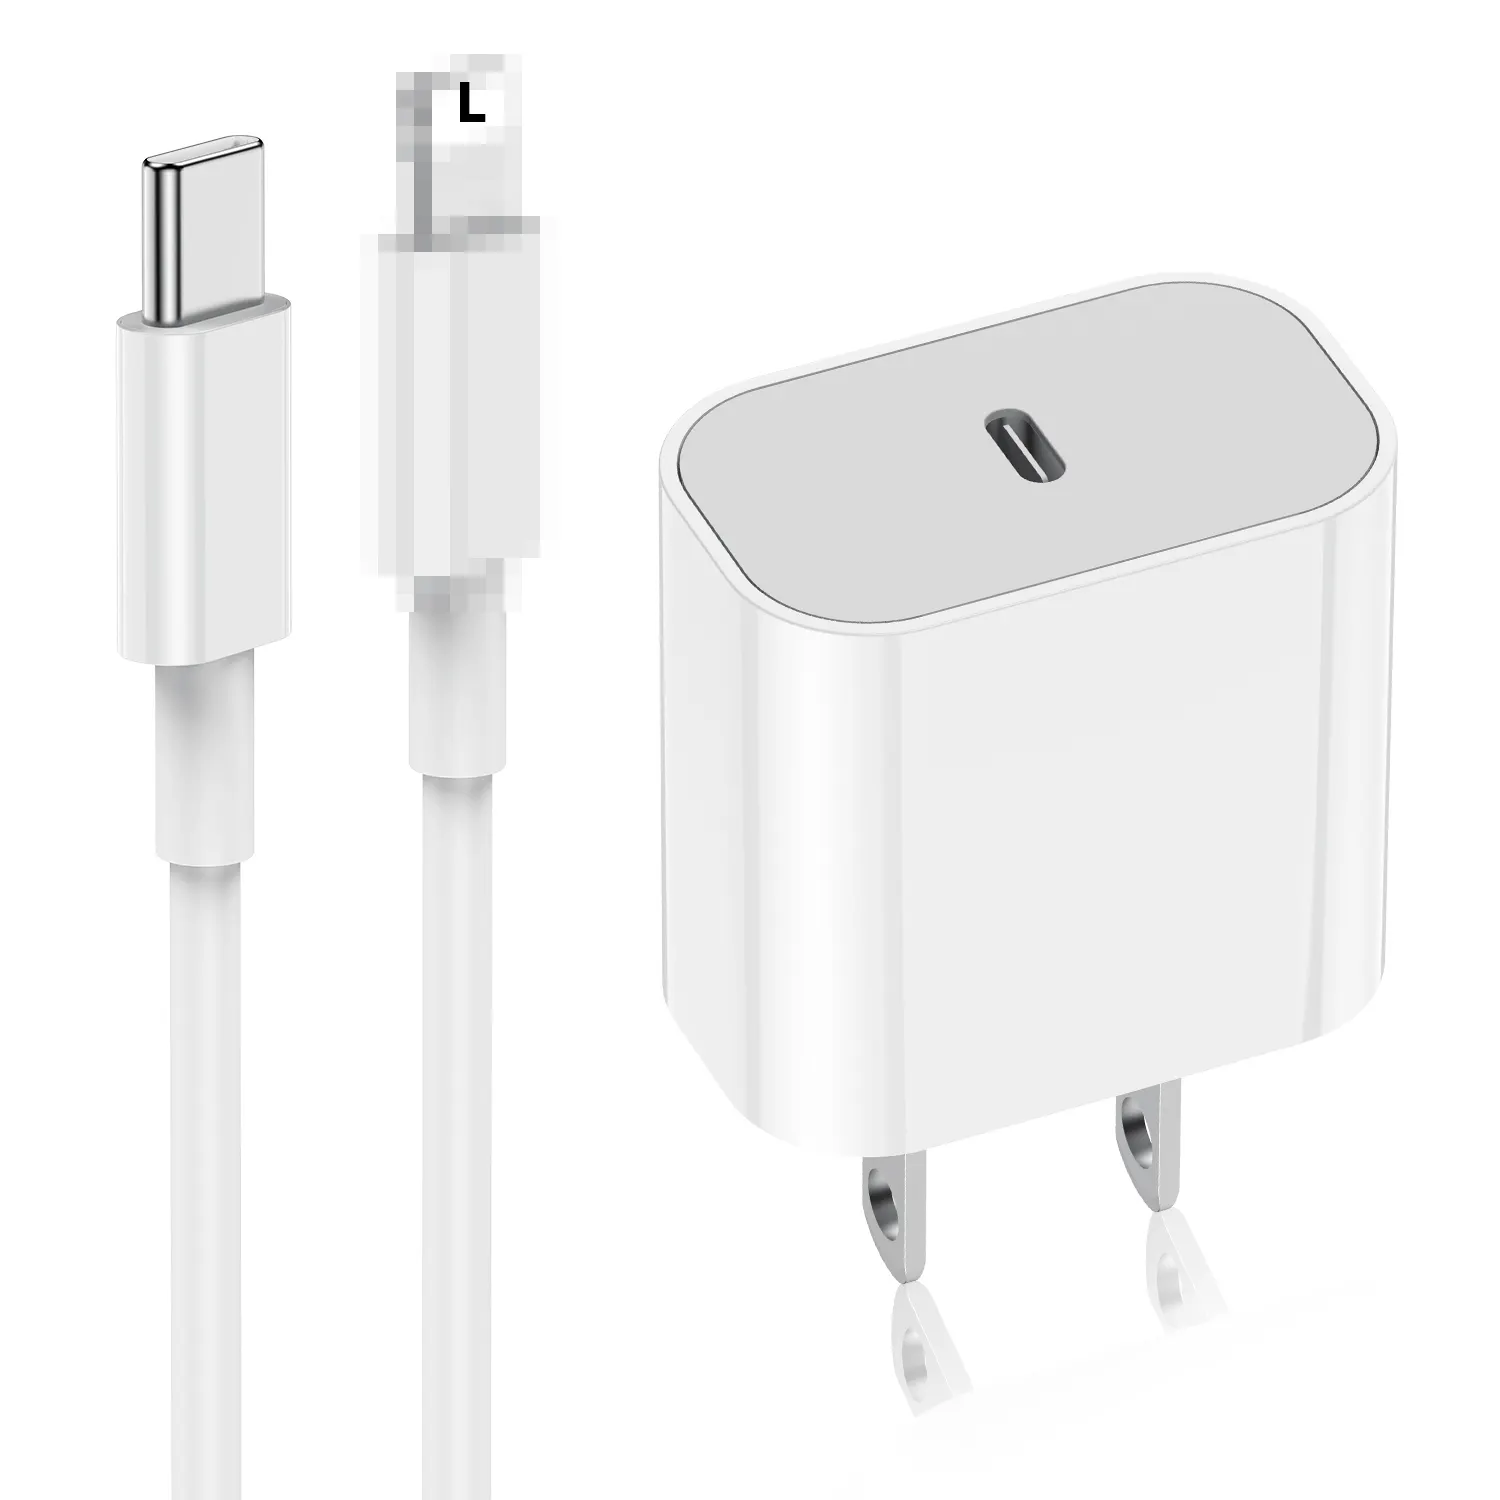 Larger stock 20 w eu us uk au plug pd20w usb c type-c block for apple for iphone 12pro max wall charger adapte